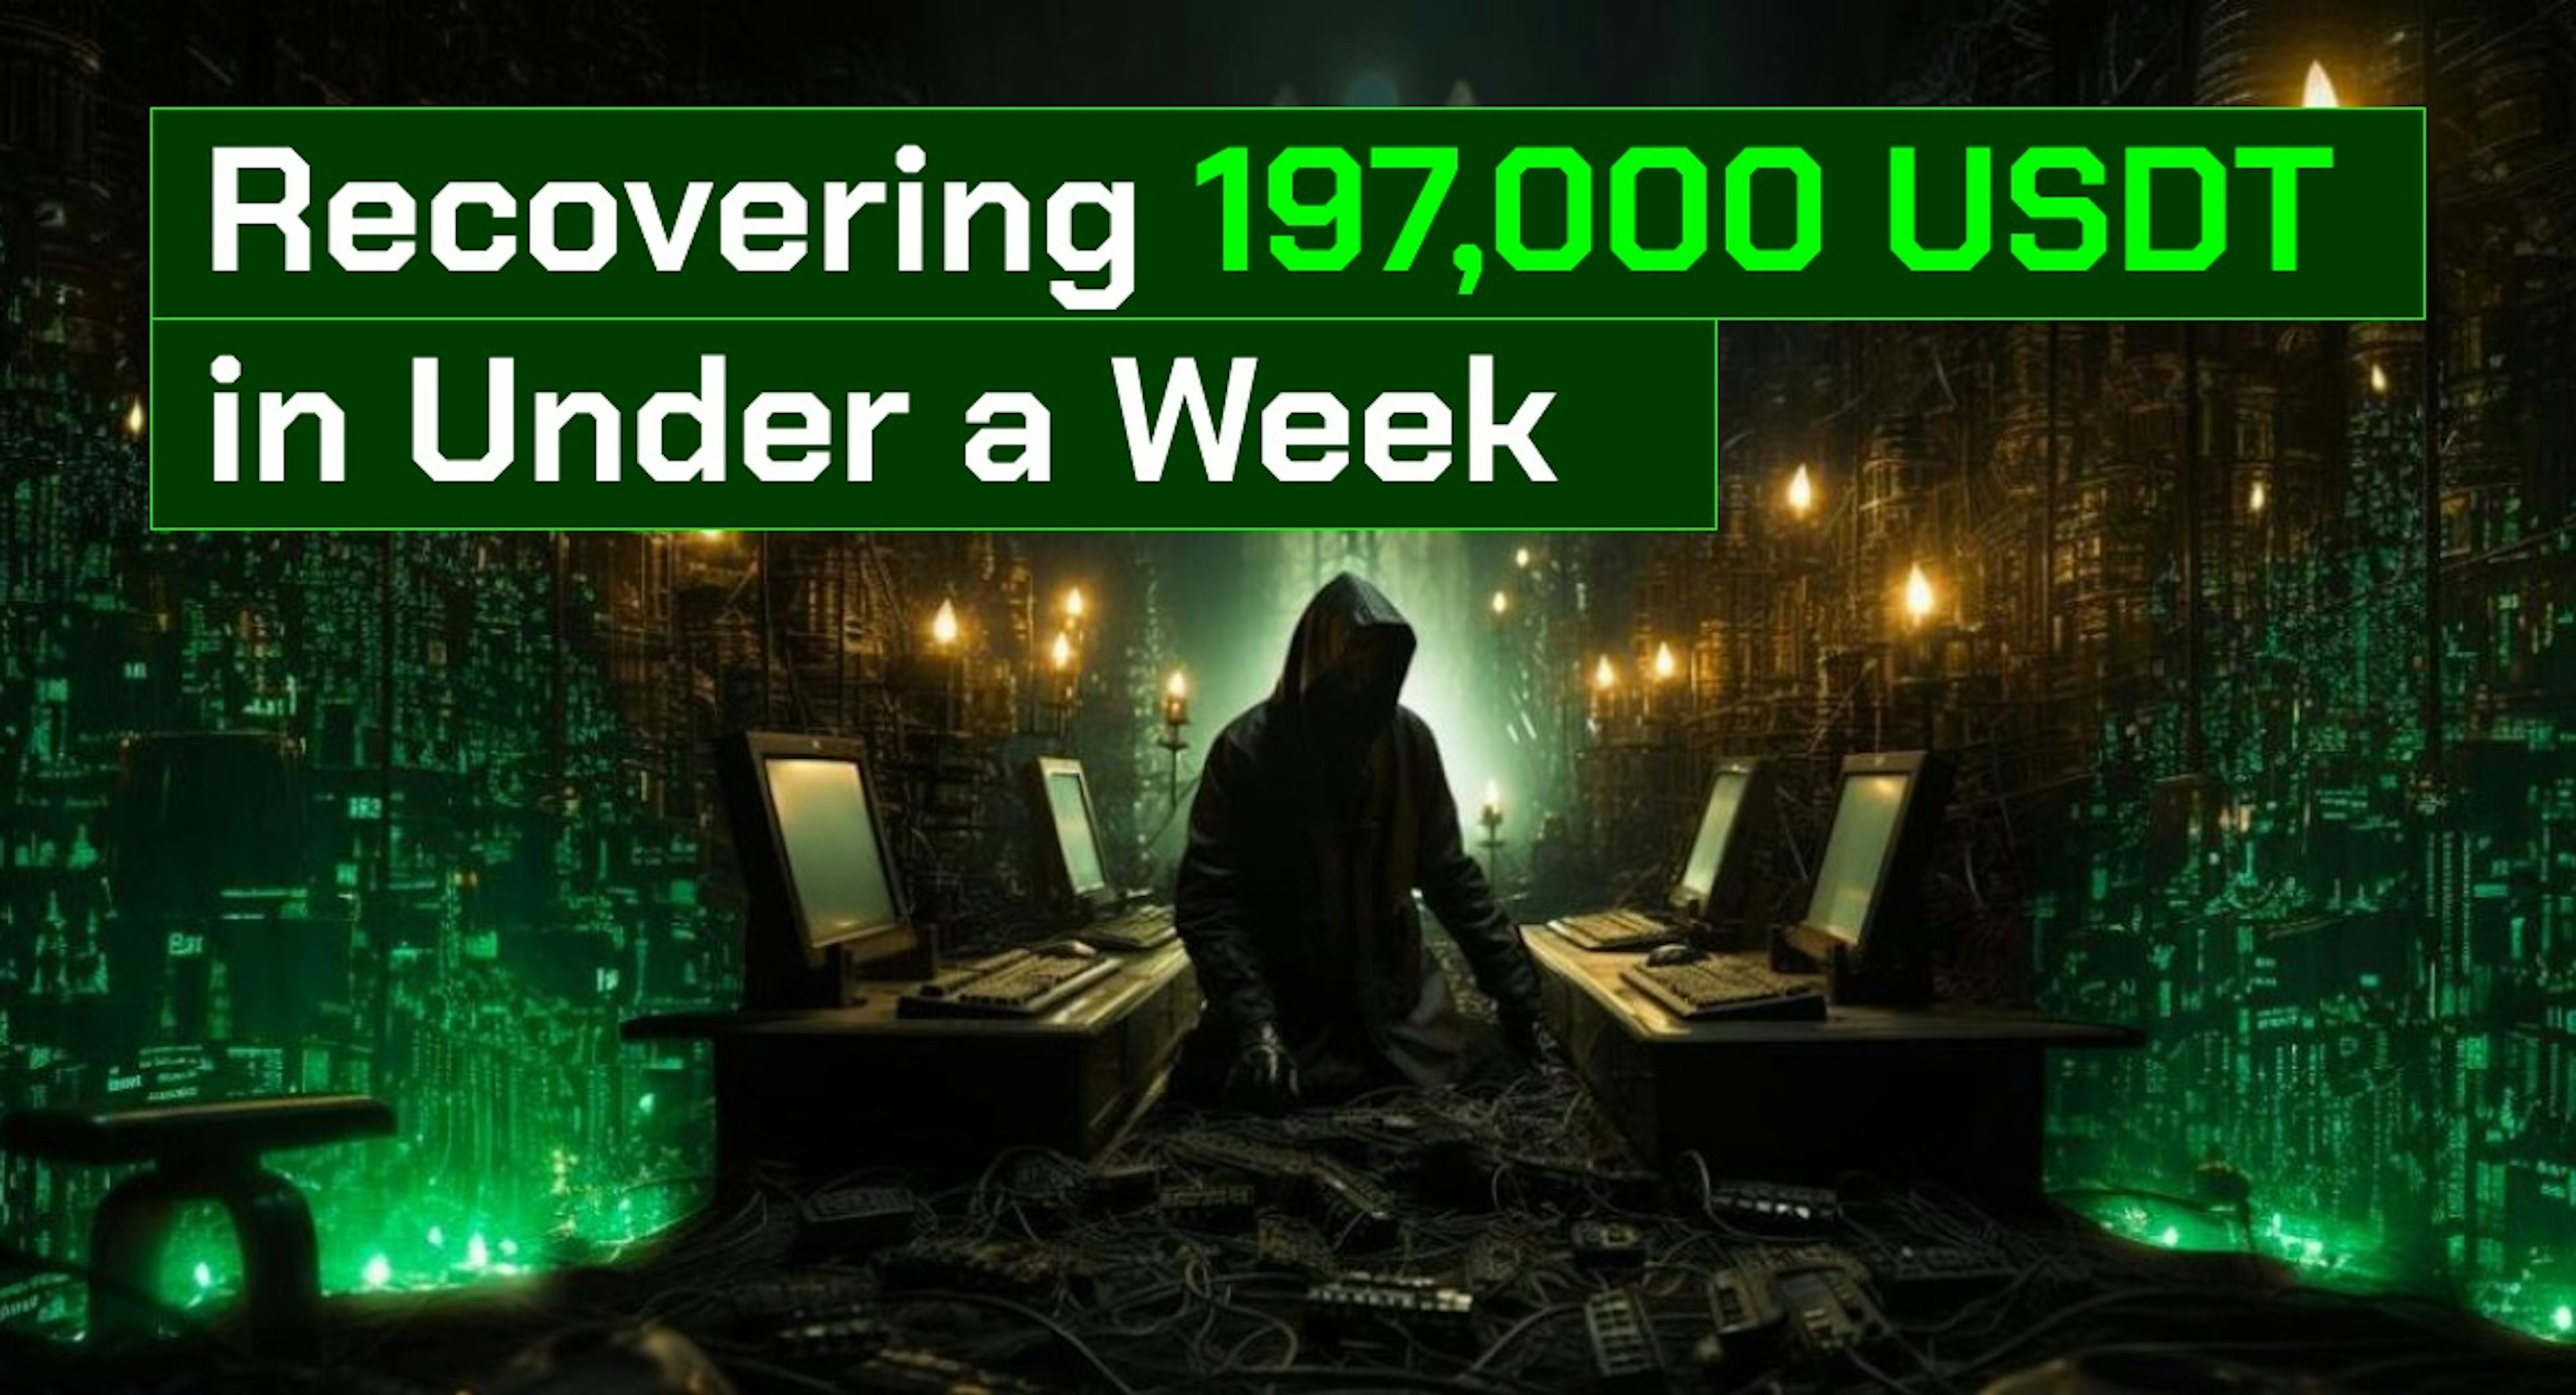 featured image - One Week to Recover $197,000 USDT Stolen